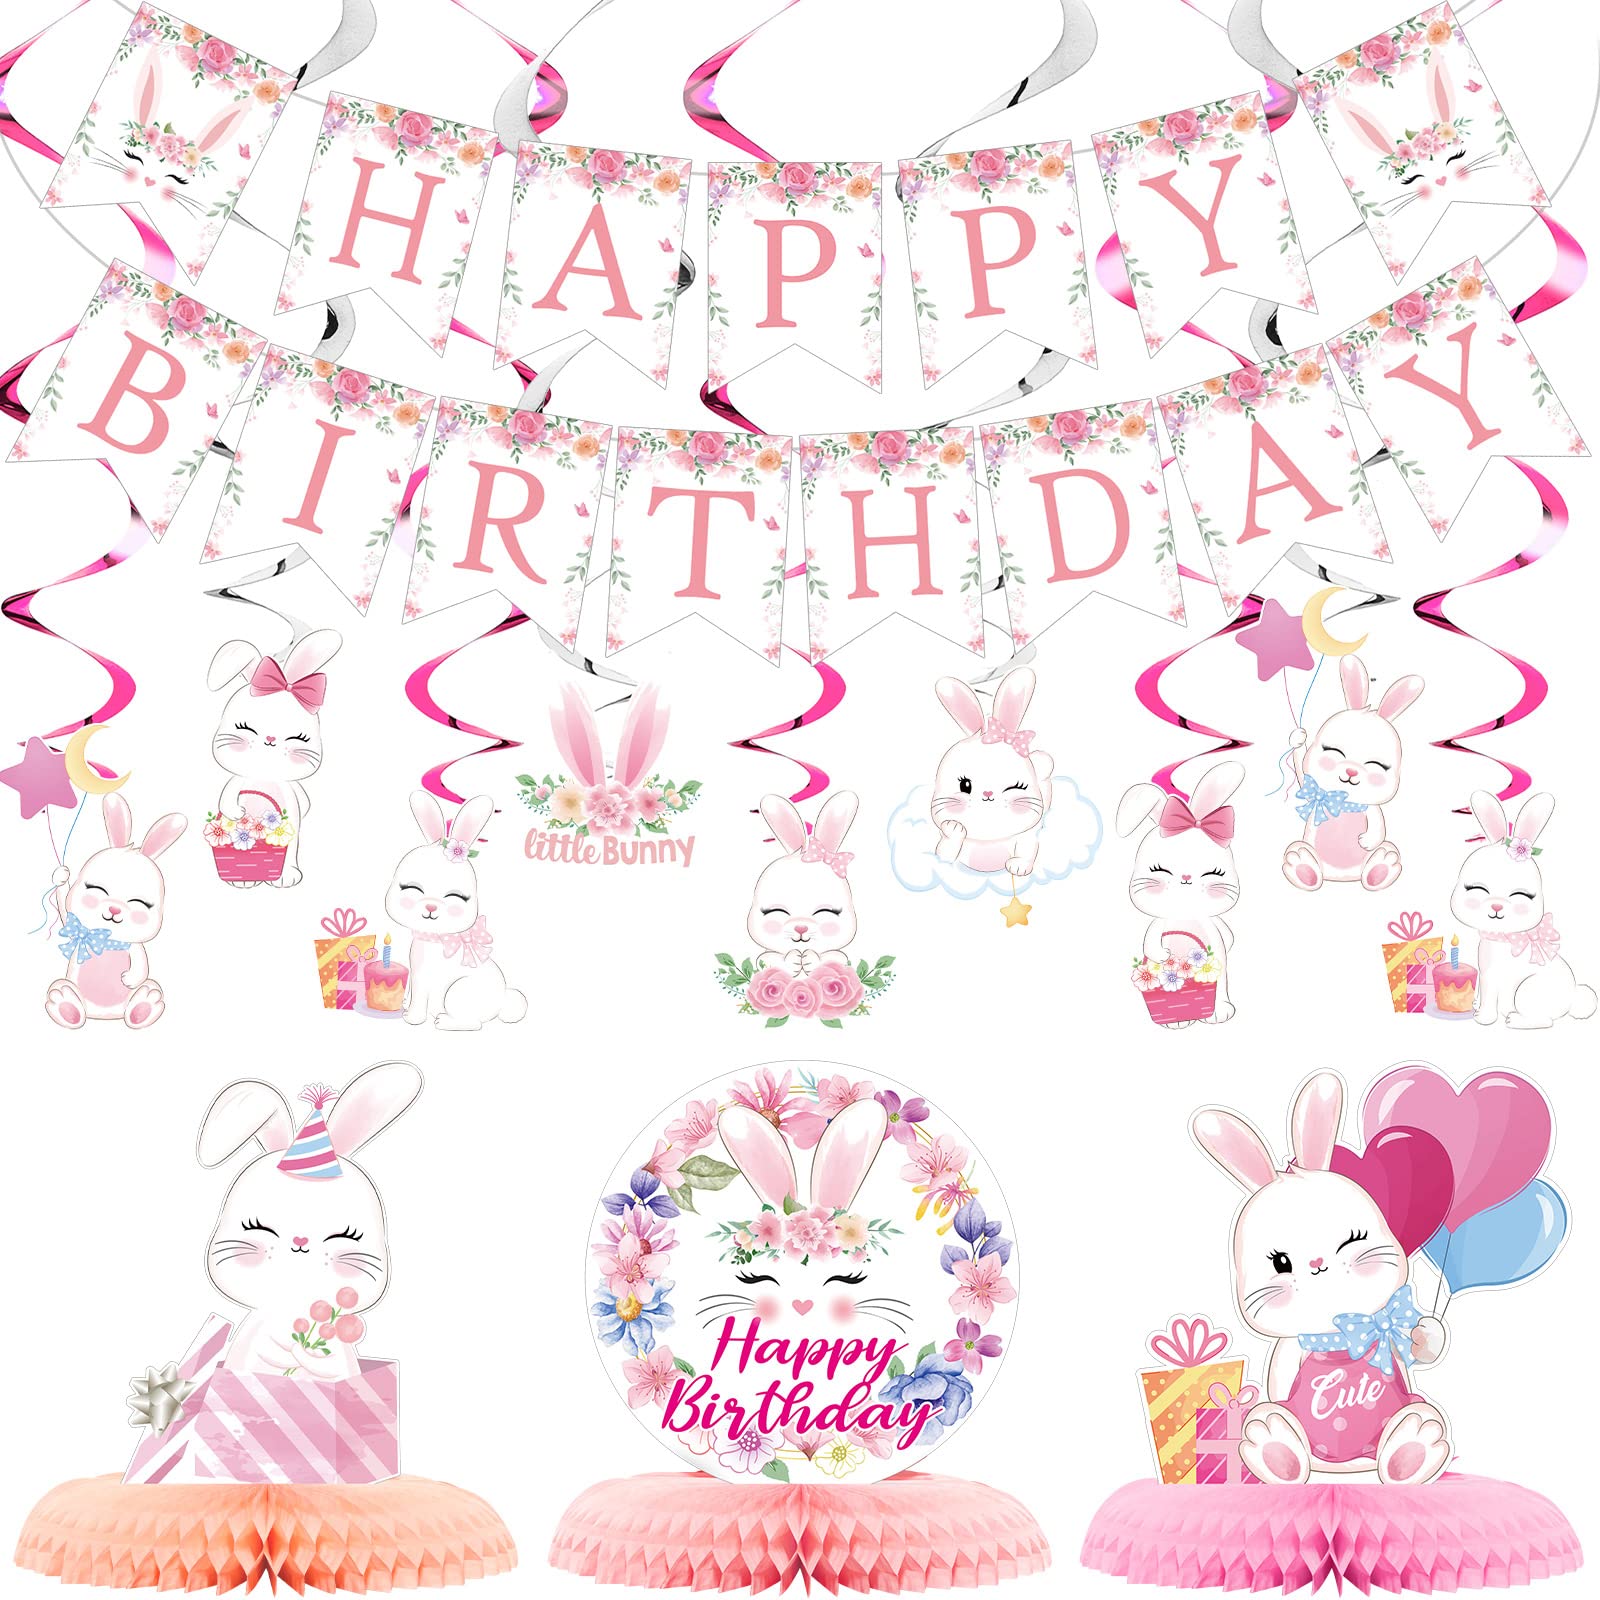 26 Pcs Easter Bunny Birthday Party Decorations Kit Bunny Party Supplies Bunny Birthday Banner Bunny Honeycomb Centerpiece Rabbit Hanging Swirls Cutouts for Girl Baby Shower Party Supplies